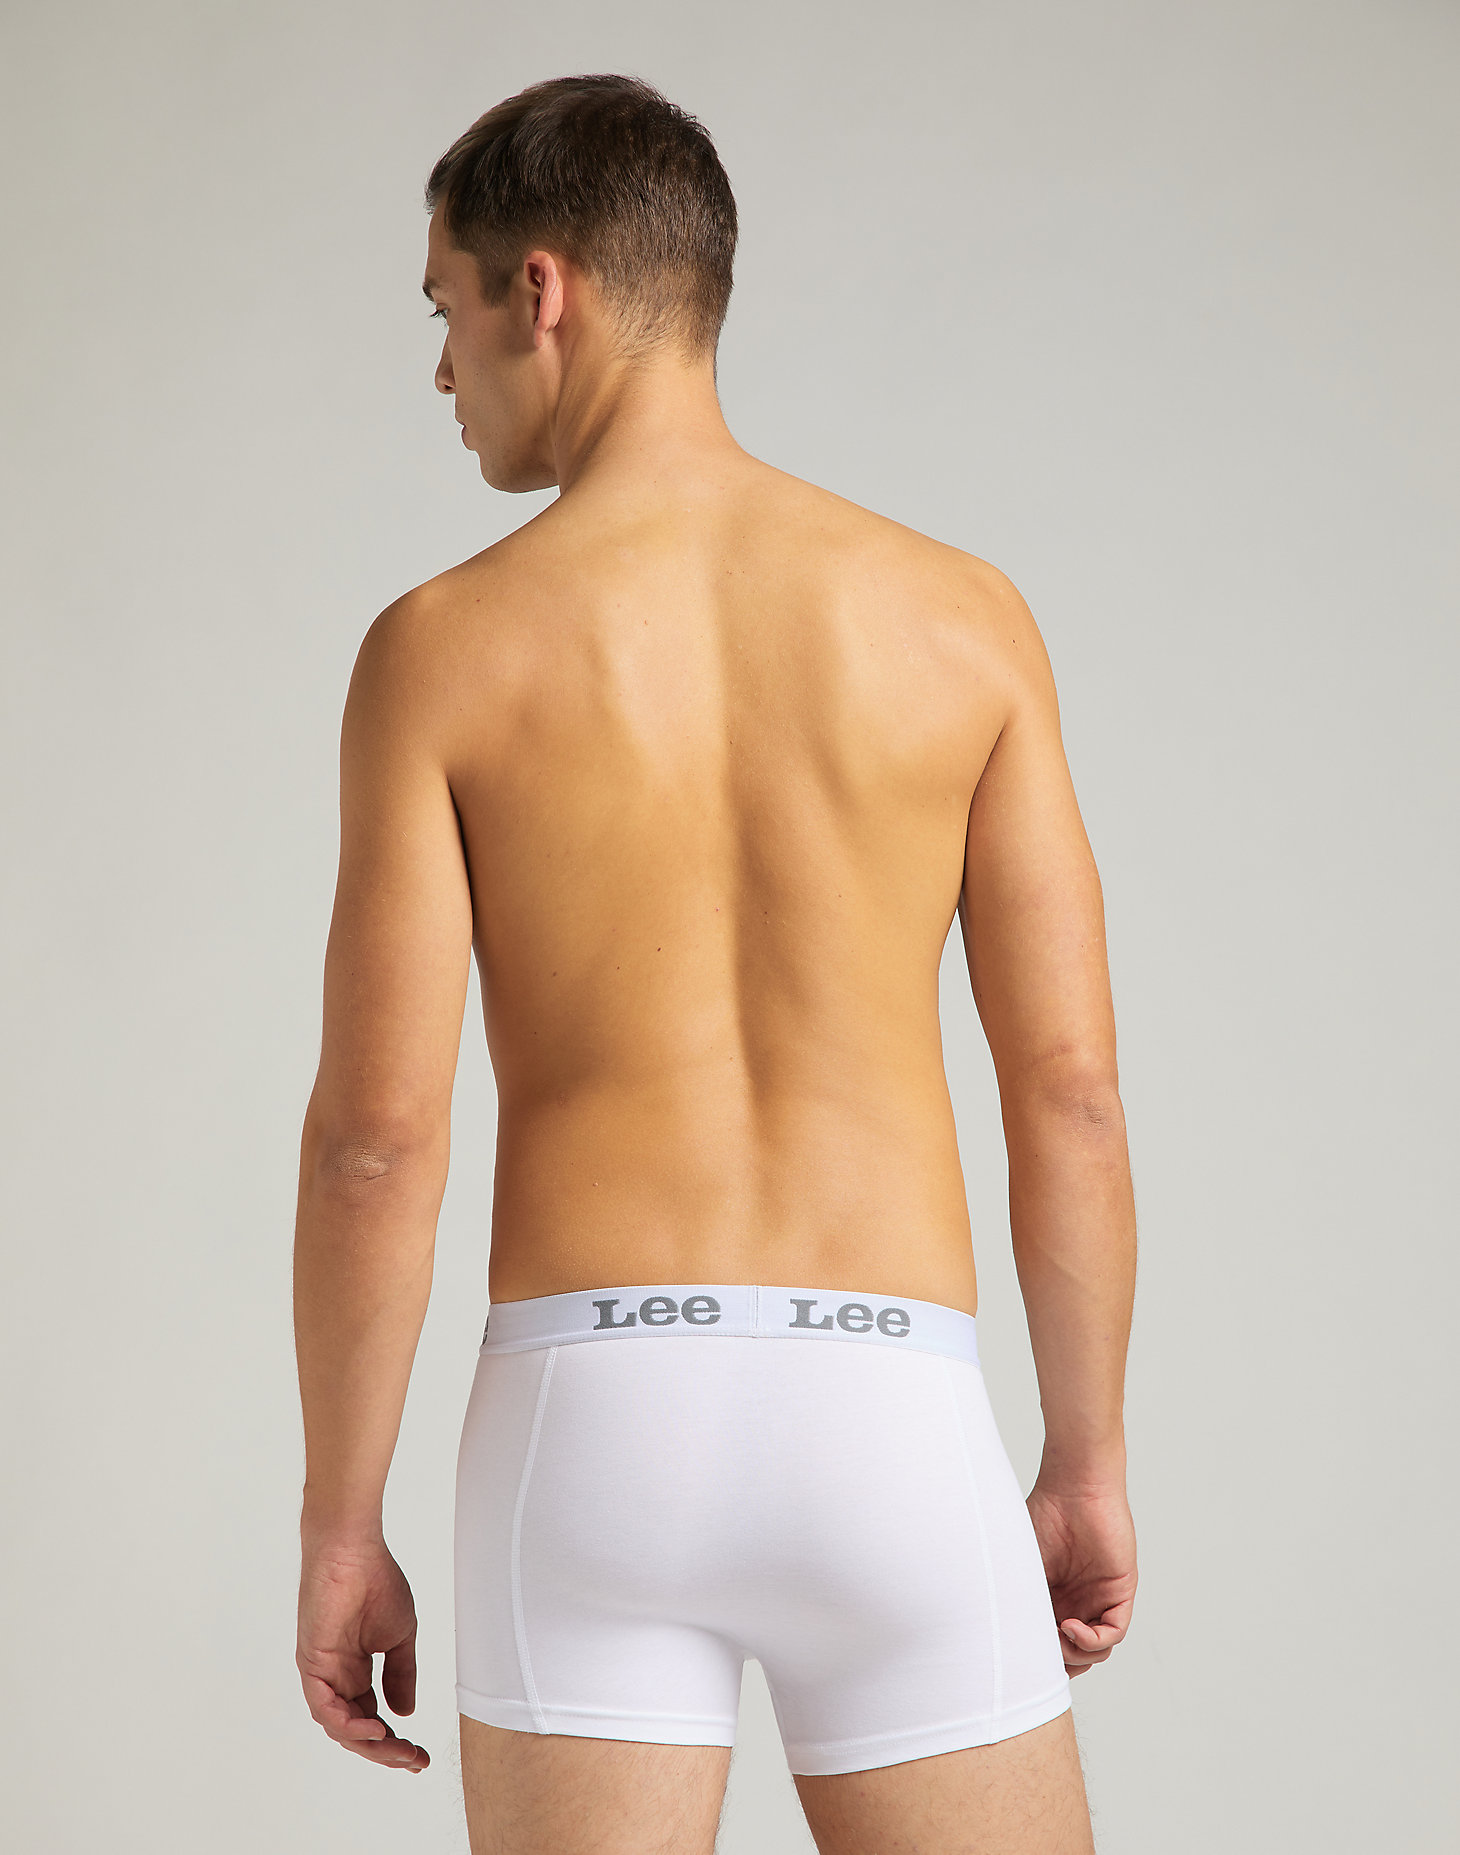 2-Pack Trunk in White alternative view 1